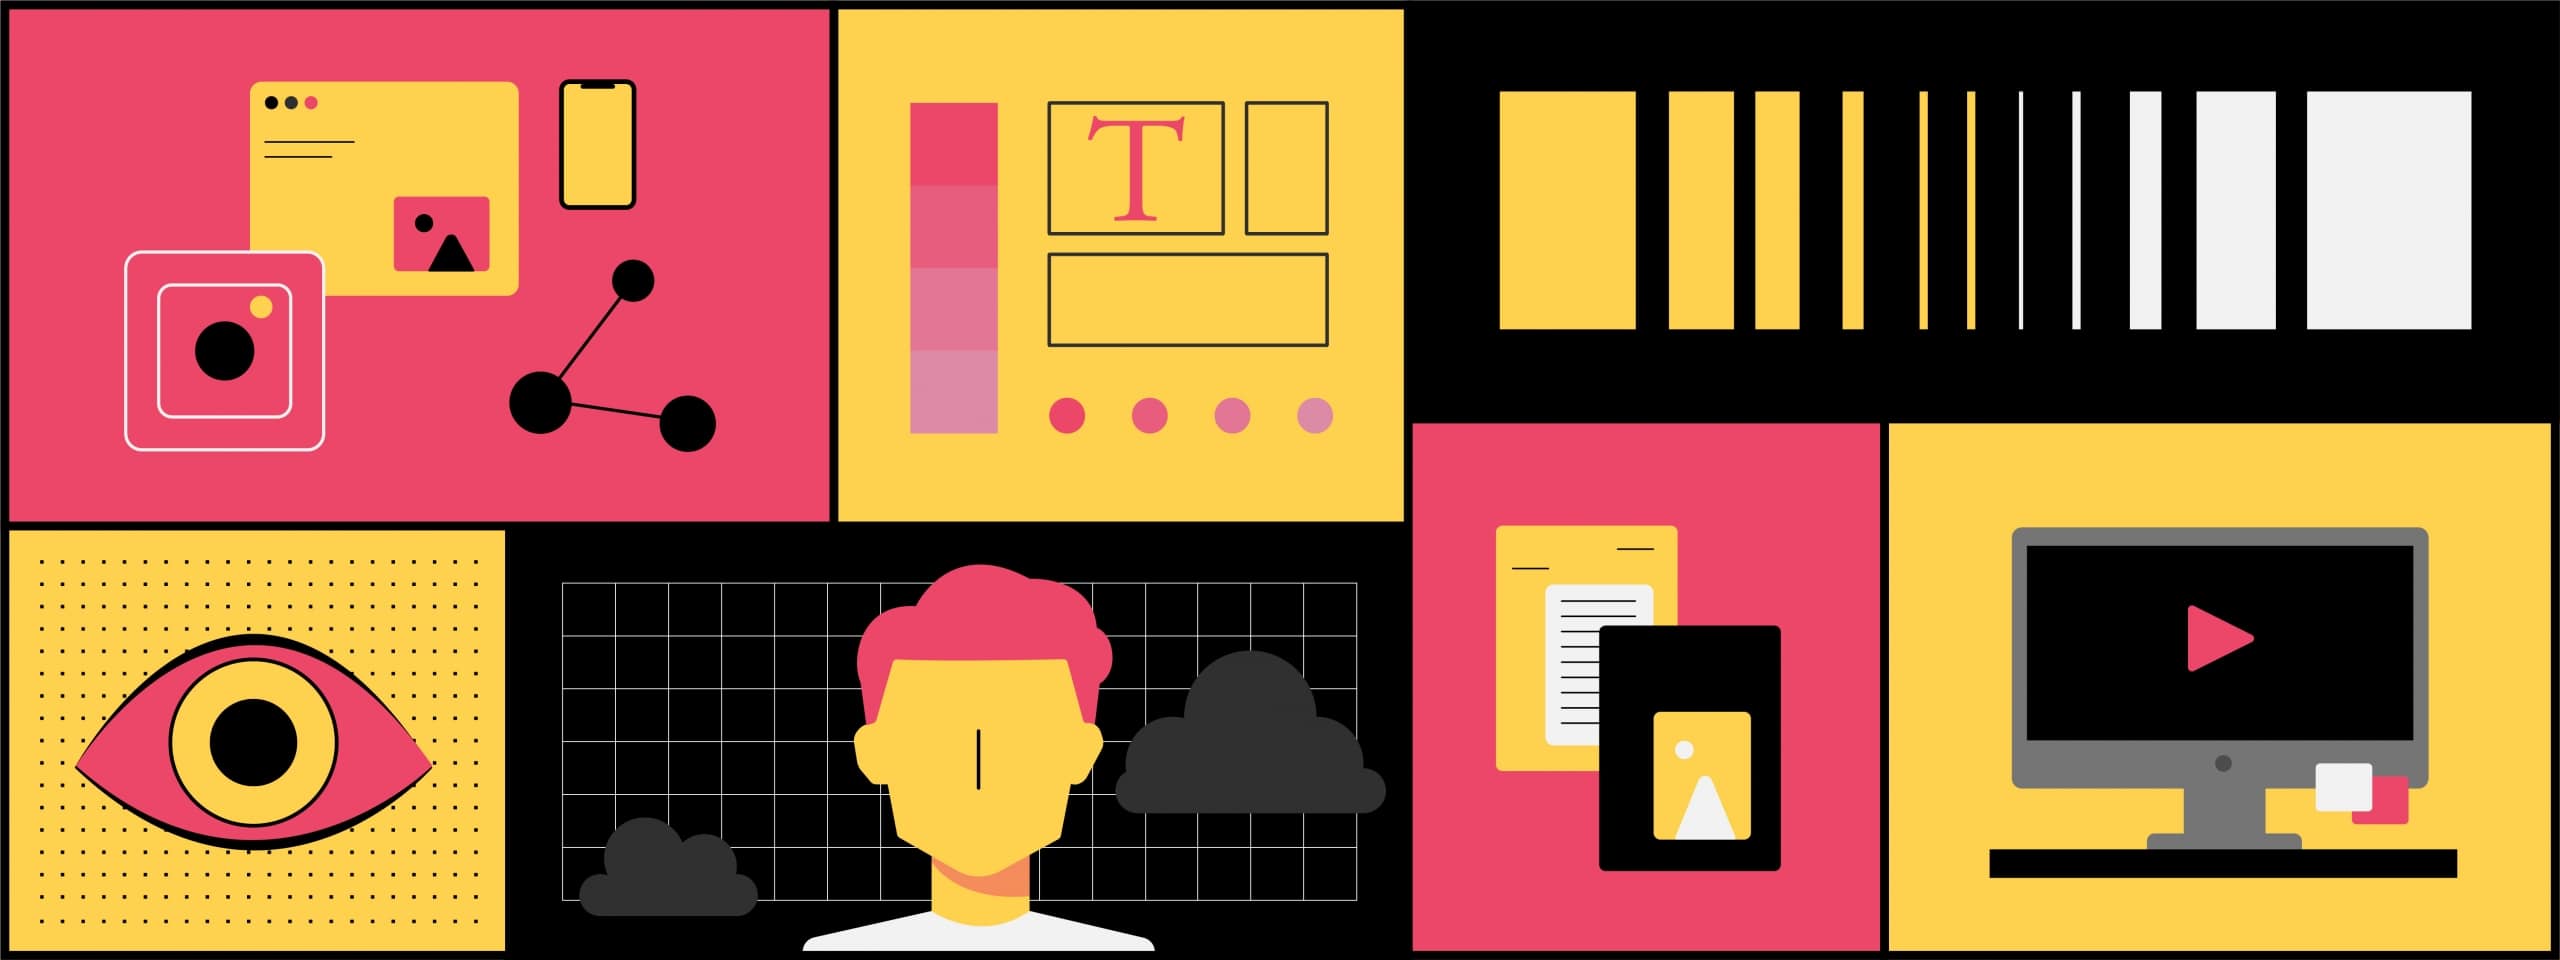 Black yellow and red background with grids that tells a story about how creative agencies works